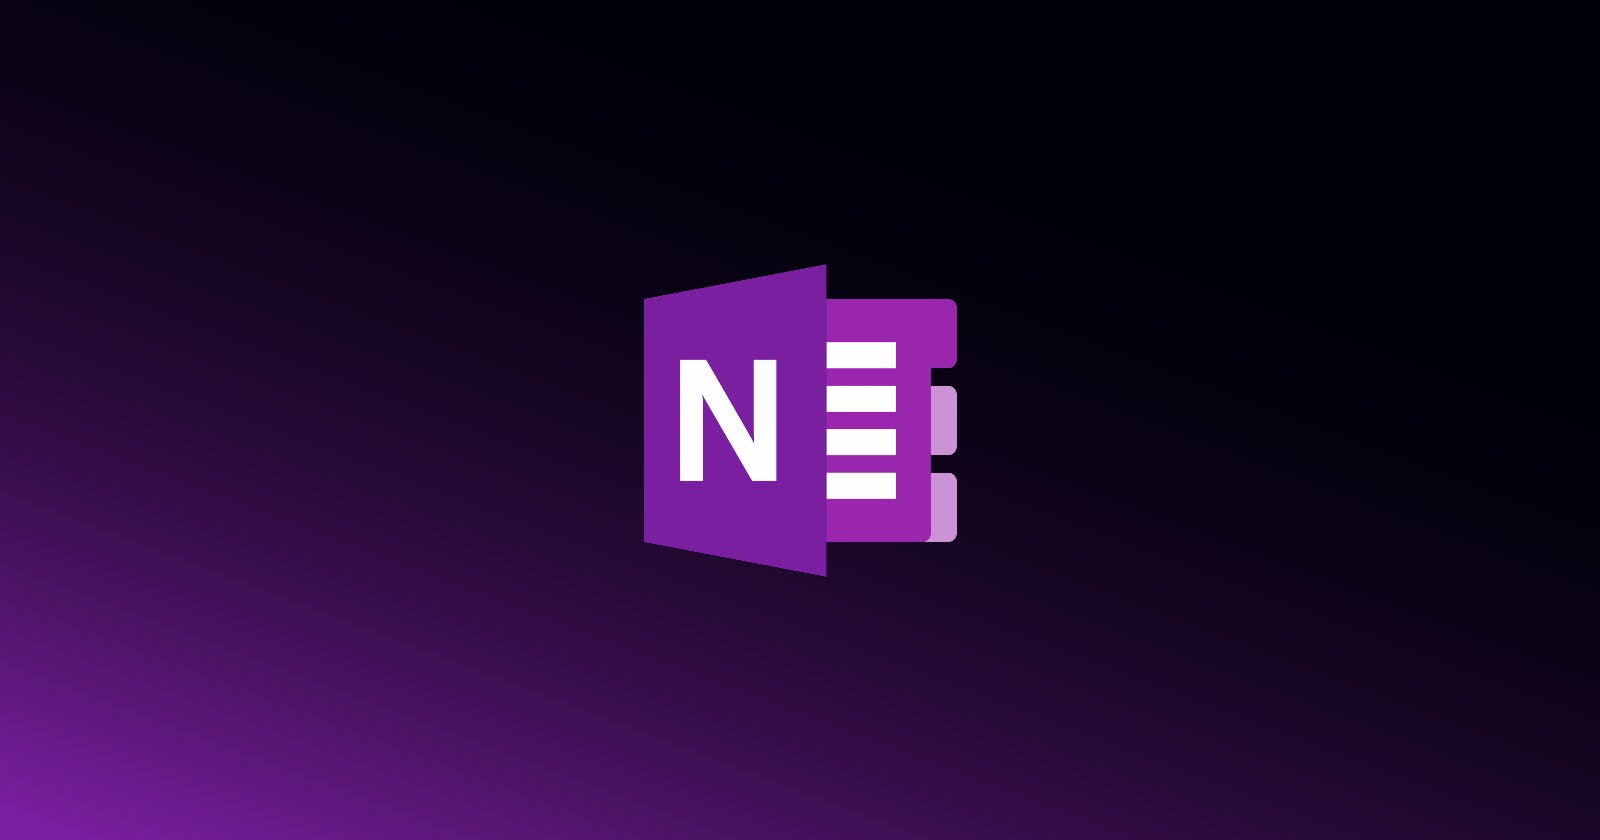 Revert back to the old OneNote version